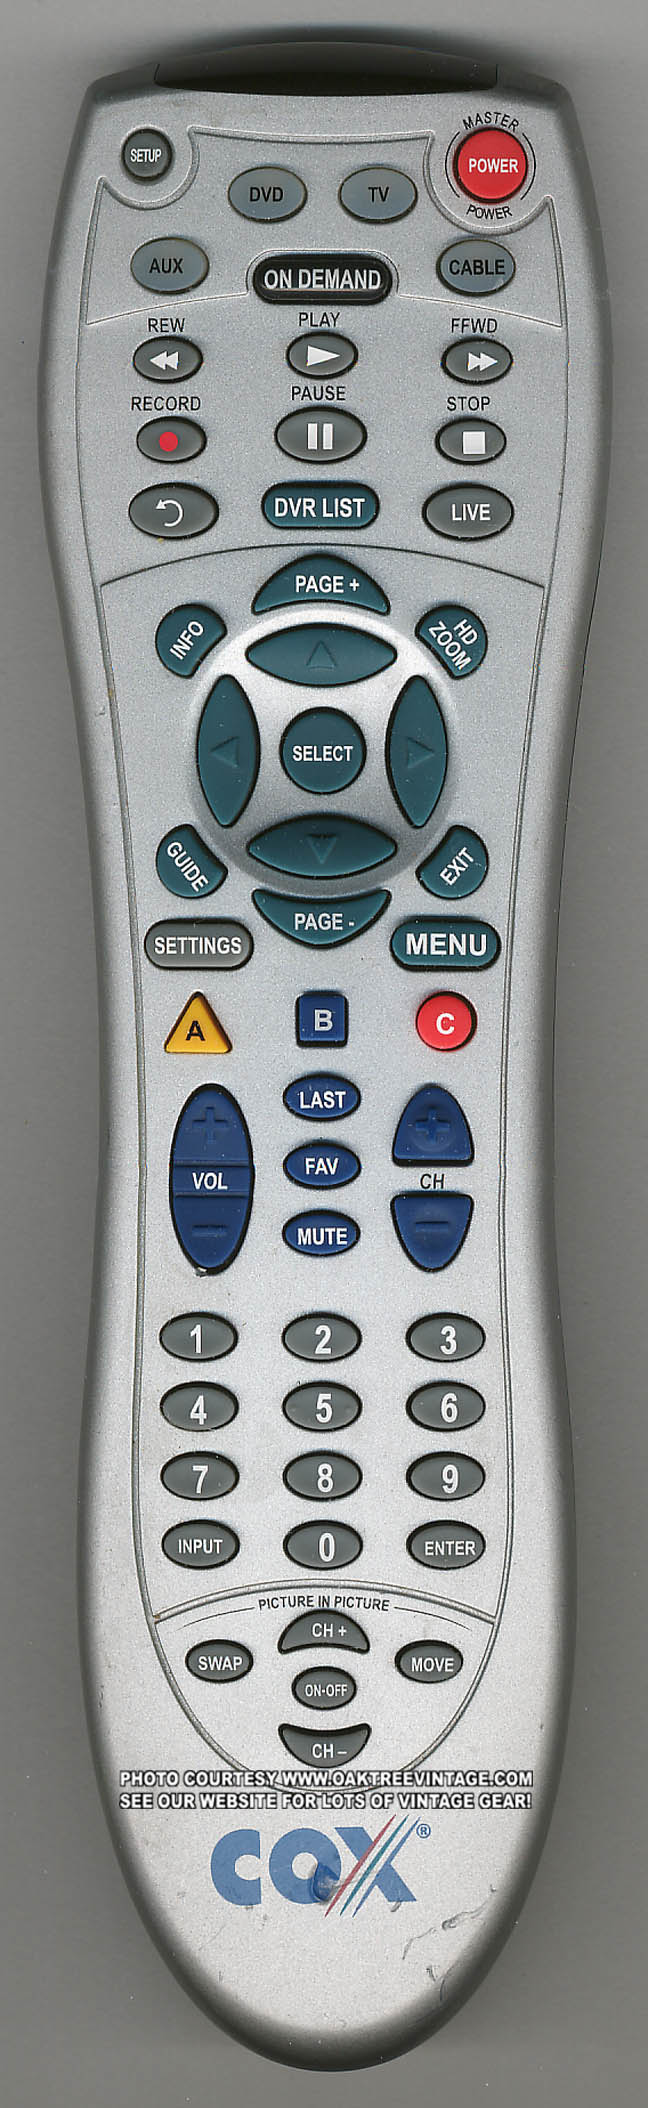 How To Program Digital Cable Remote To Tv